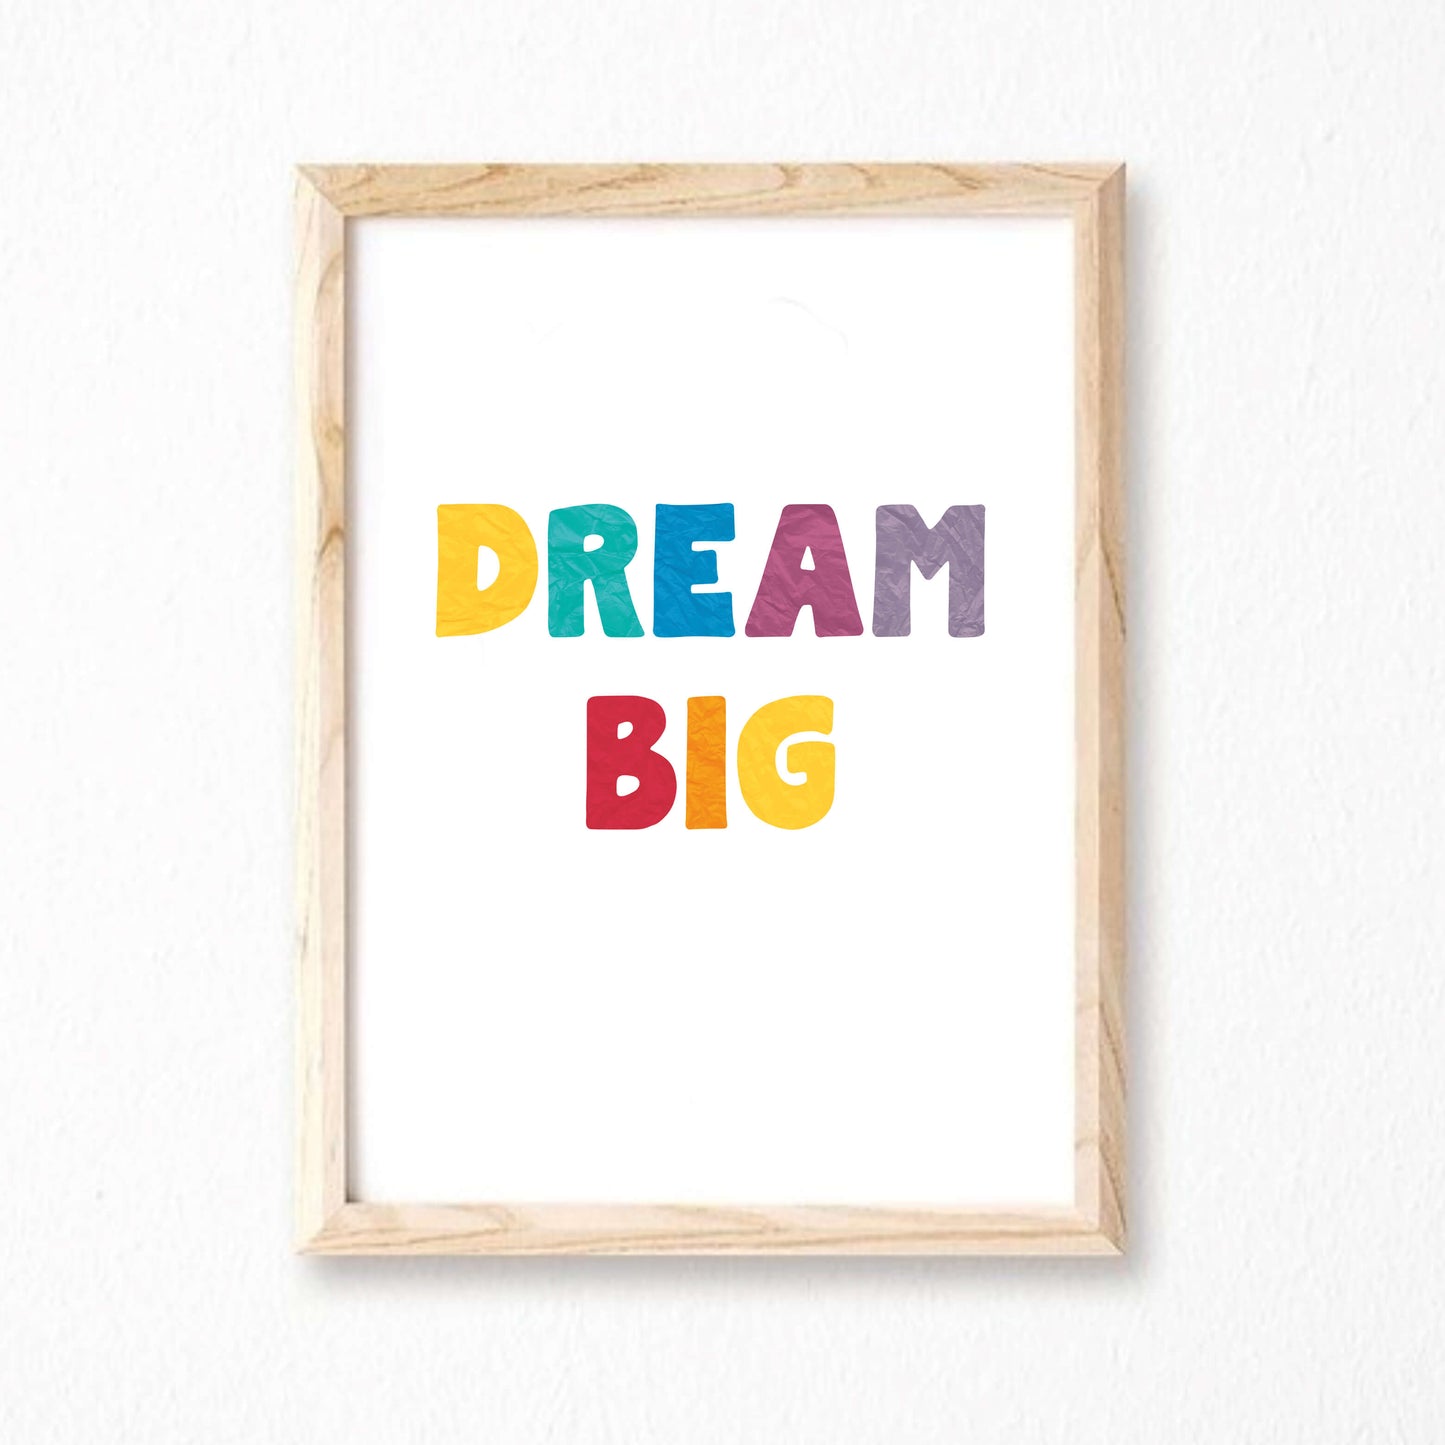 Dream Big Wallprint by SixElevenCreations. Product Code SEP0503